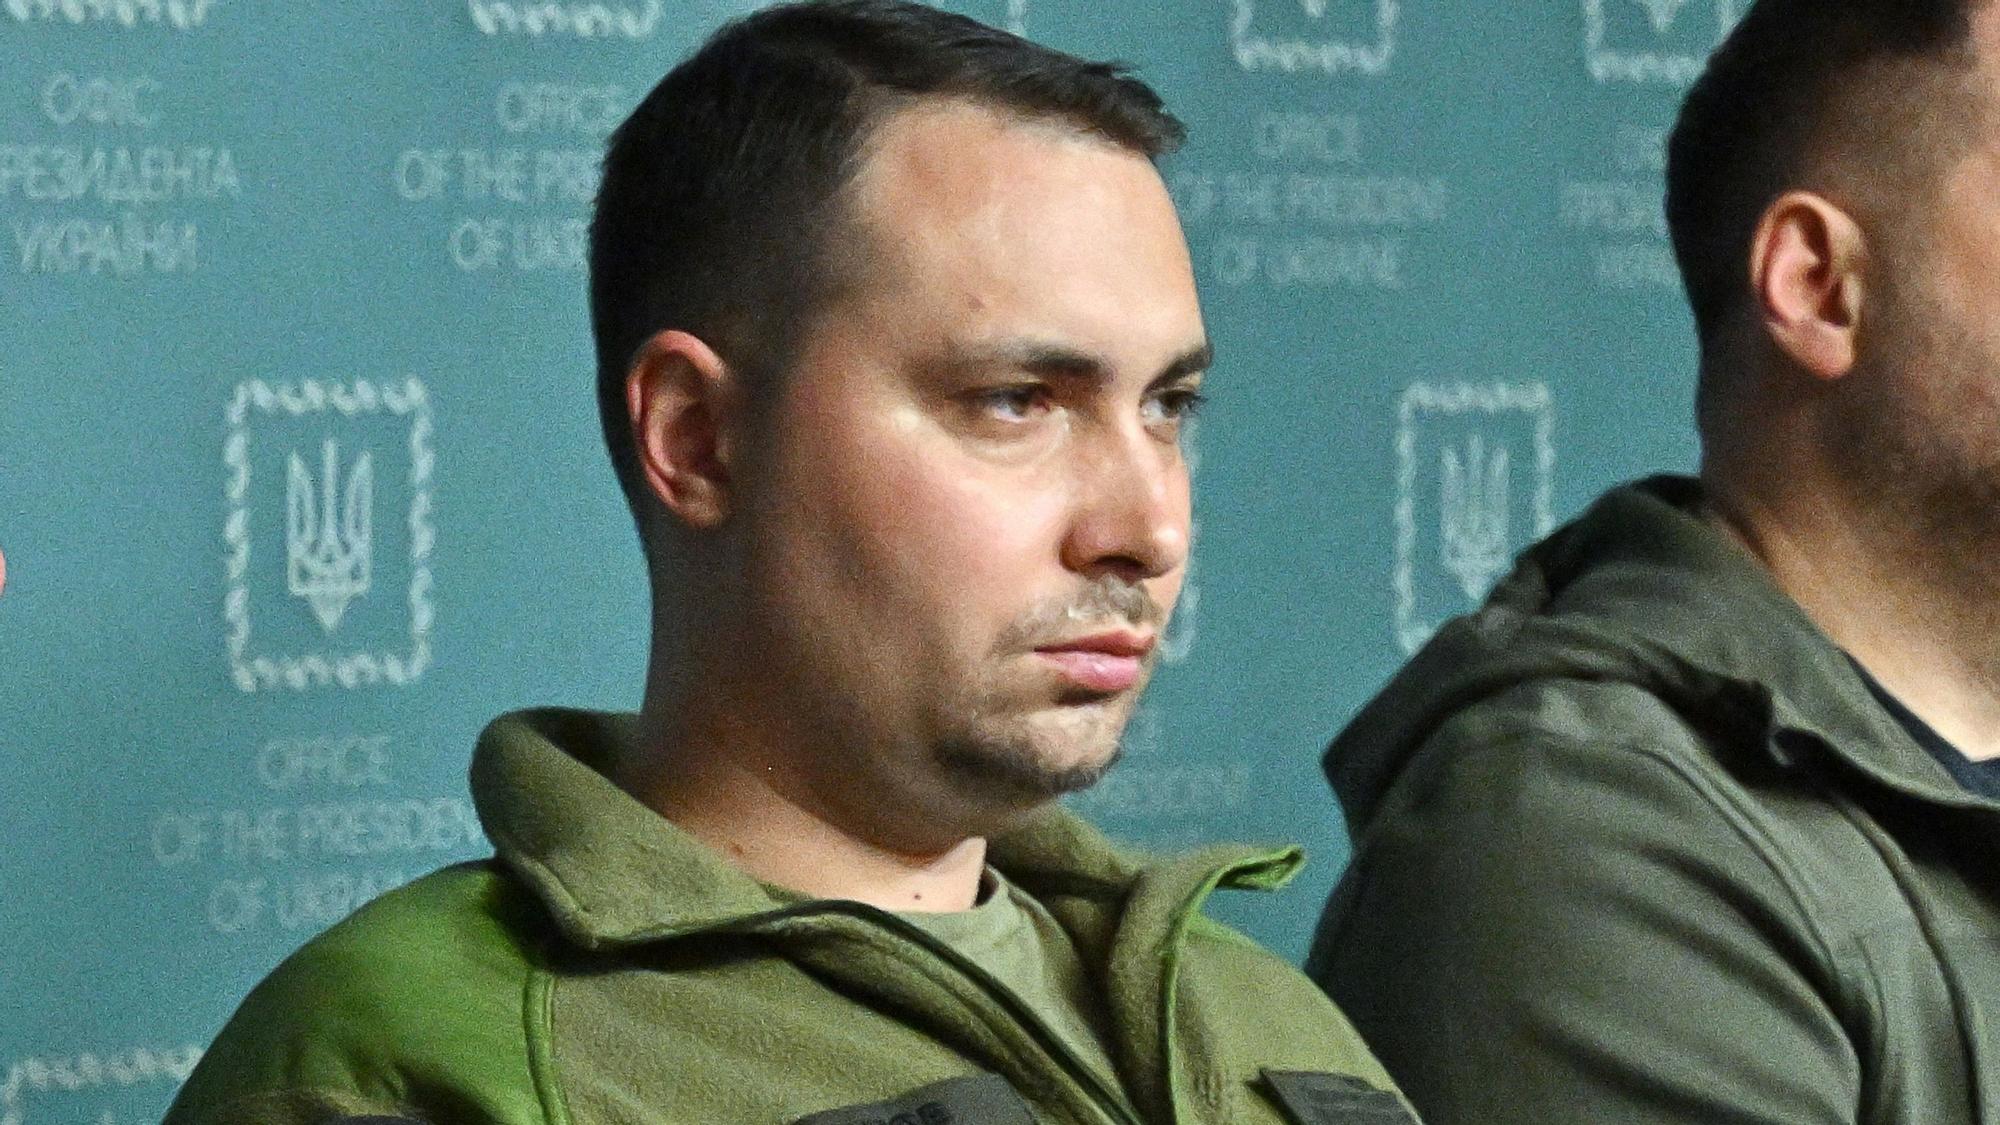 This photo taken on September 22, 2022, shows head of Ukraine's military intelligence Kyrylo Budanov attending a press conference in Kyiv on September 22, 2022. - Ukraine's defence minister will be preplaced by the chief of the military intelligence ahead of an expected Russian offensive and following corruption scandals, a senior lawmaker said on February 5, 2023.&quot;Kyrylo Budanov will head the defence ministry, which is absolutely logical in wartime,&quot; said senior lawmaker David Arakhamia, referring to the 37-year-old chief of the military intelligence. (Photo by Sergei SUPINSKY / AFP)